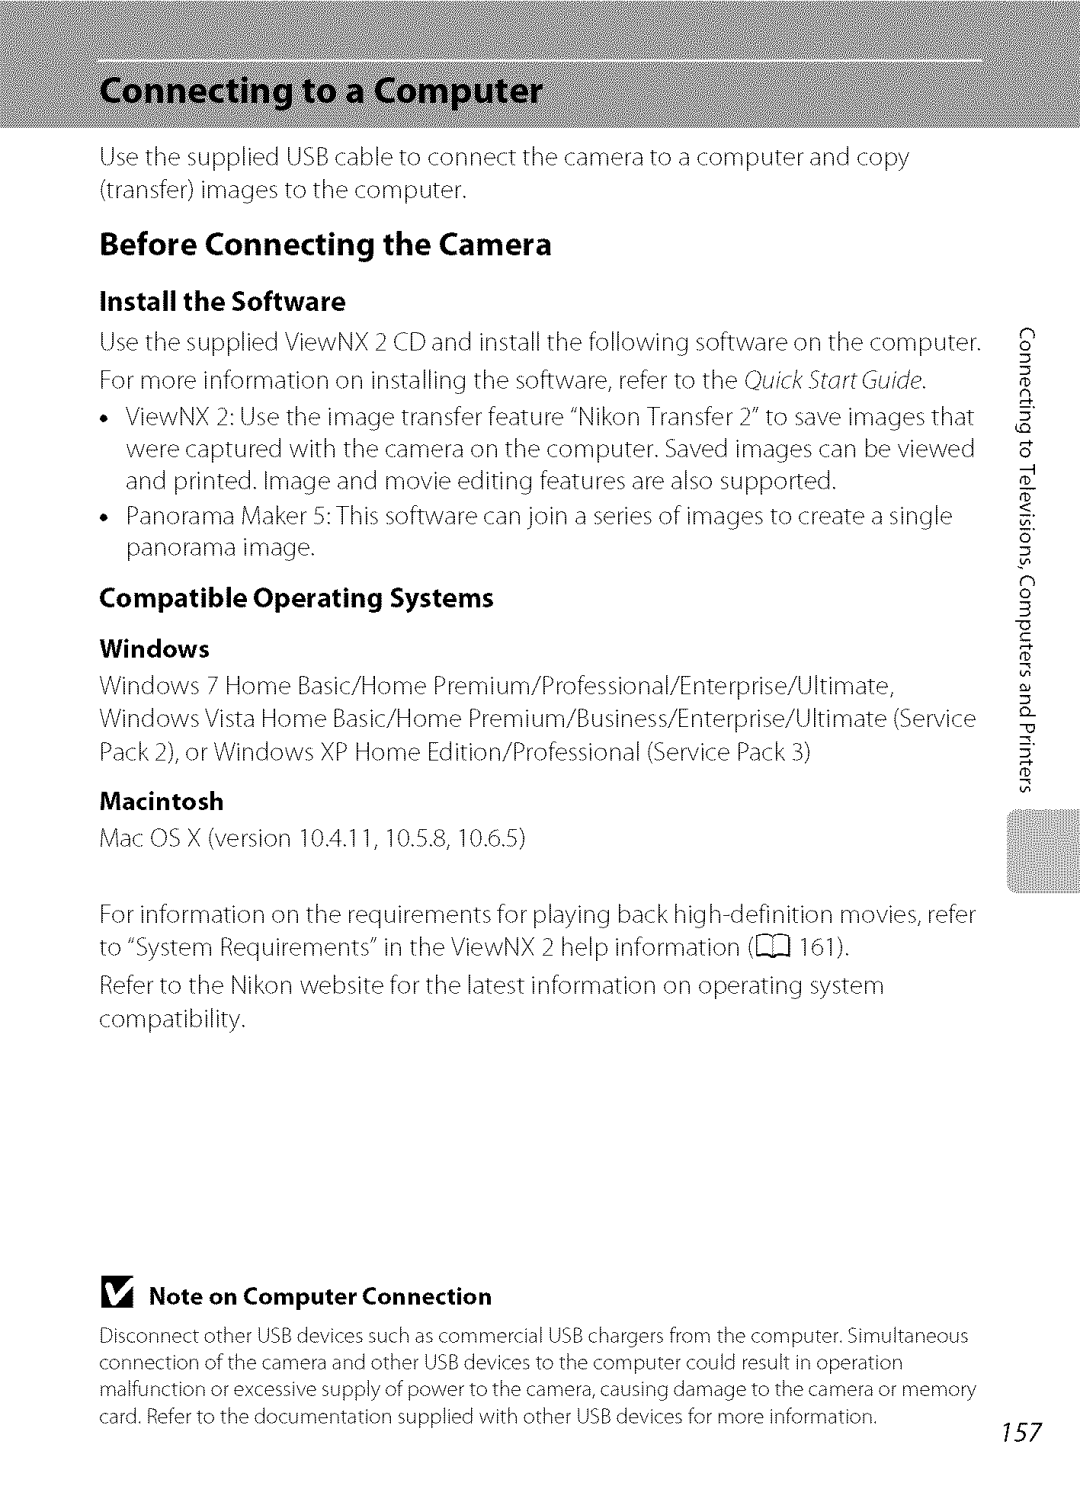 Nikon S9100 user manual Before Connecting the Camera, Install the Software, Compatible Operating Systems Windows, Macintosh 